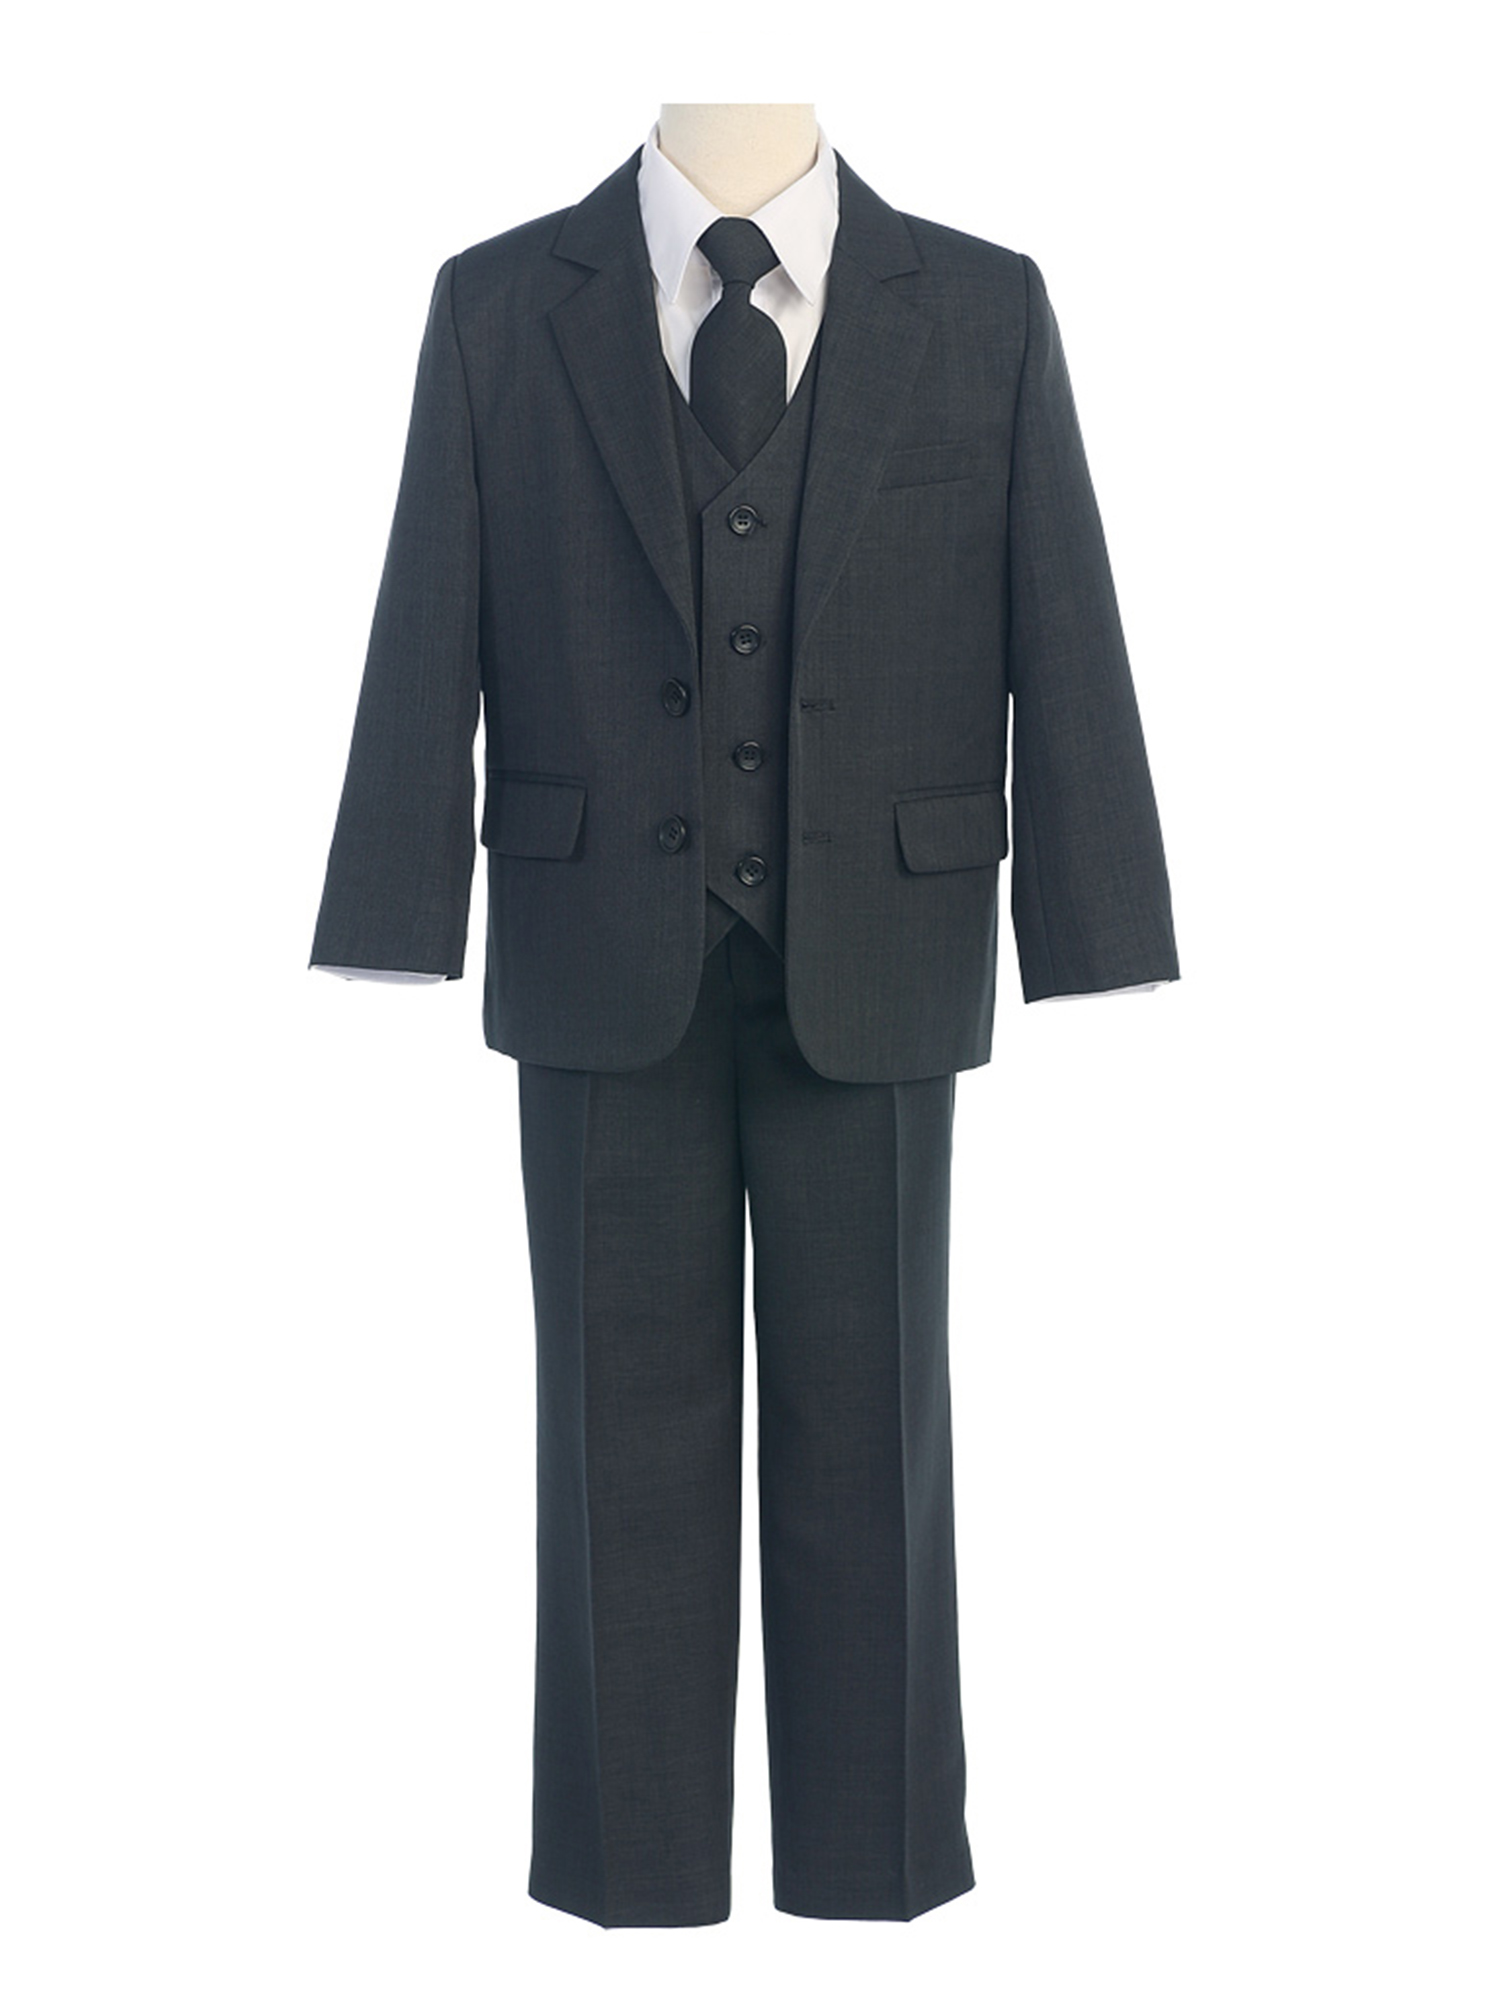 COLE Boys Suit with Shirt and Vest (5-Piece) - (12 Husky, Charcoal Grey)